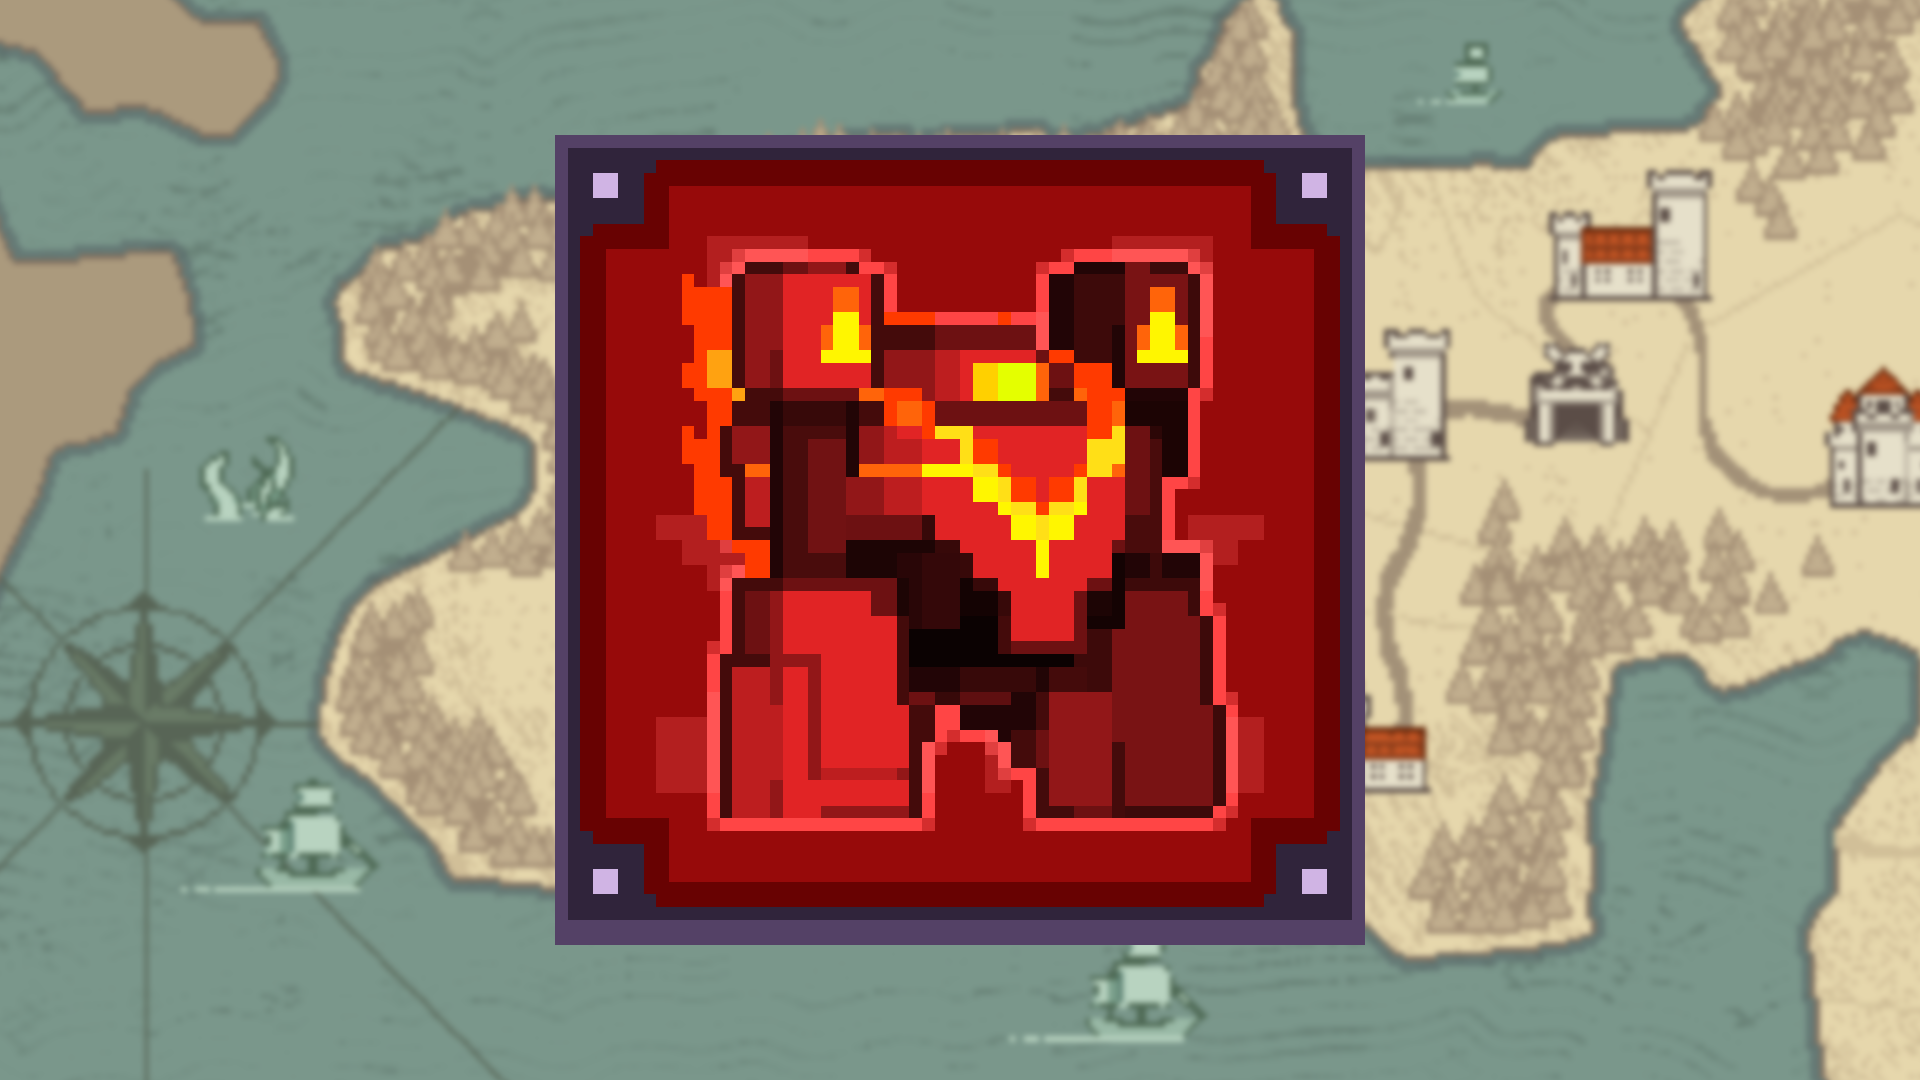 Icon for Fire Golem